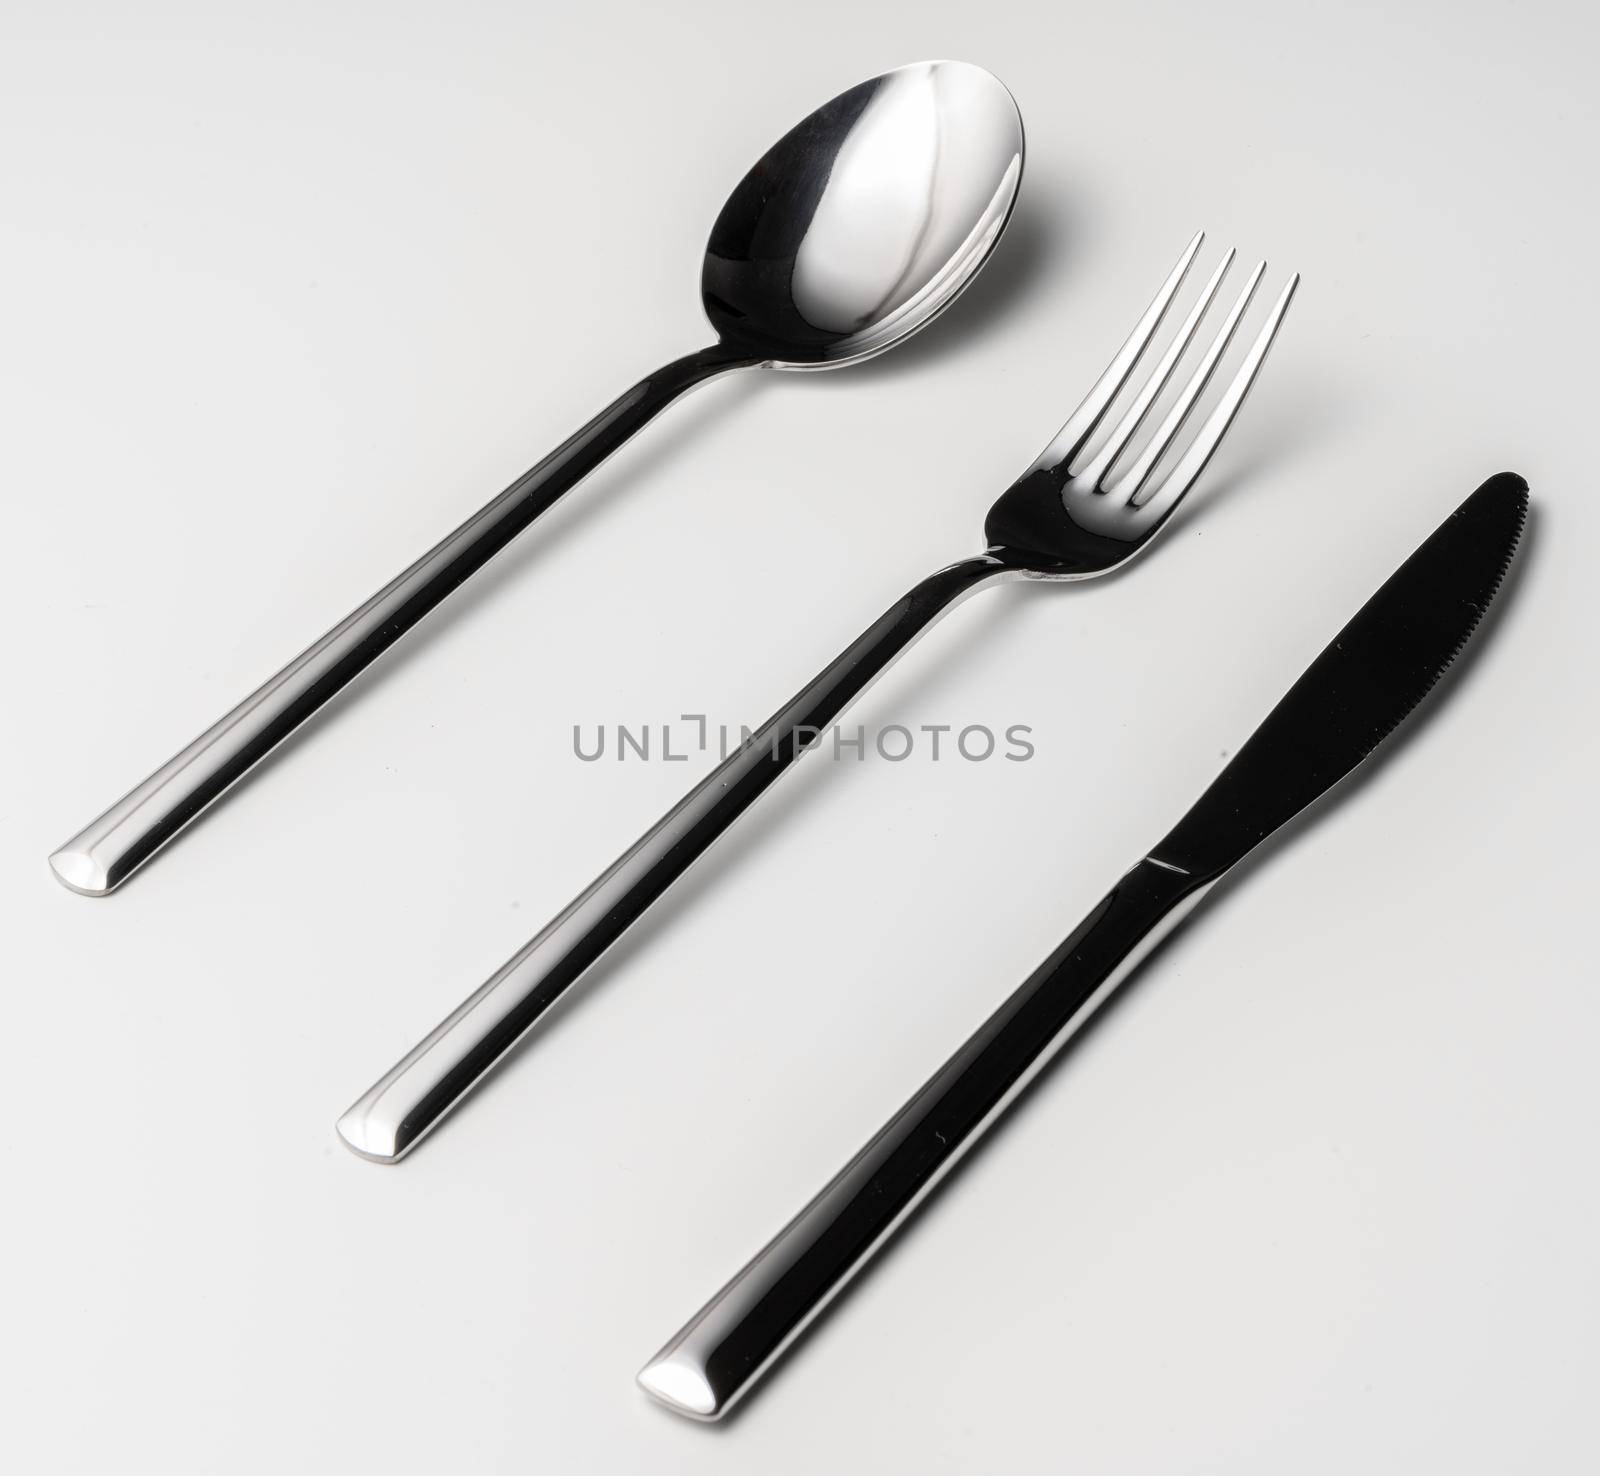 Spoon, fork and knife on a white background by Fabrikasimf